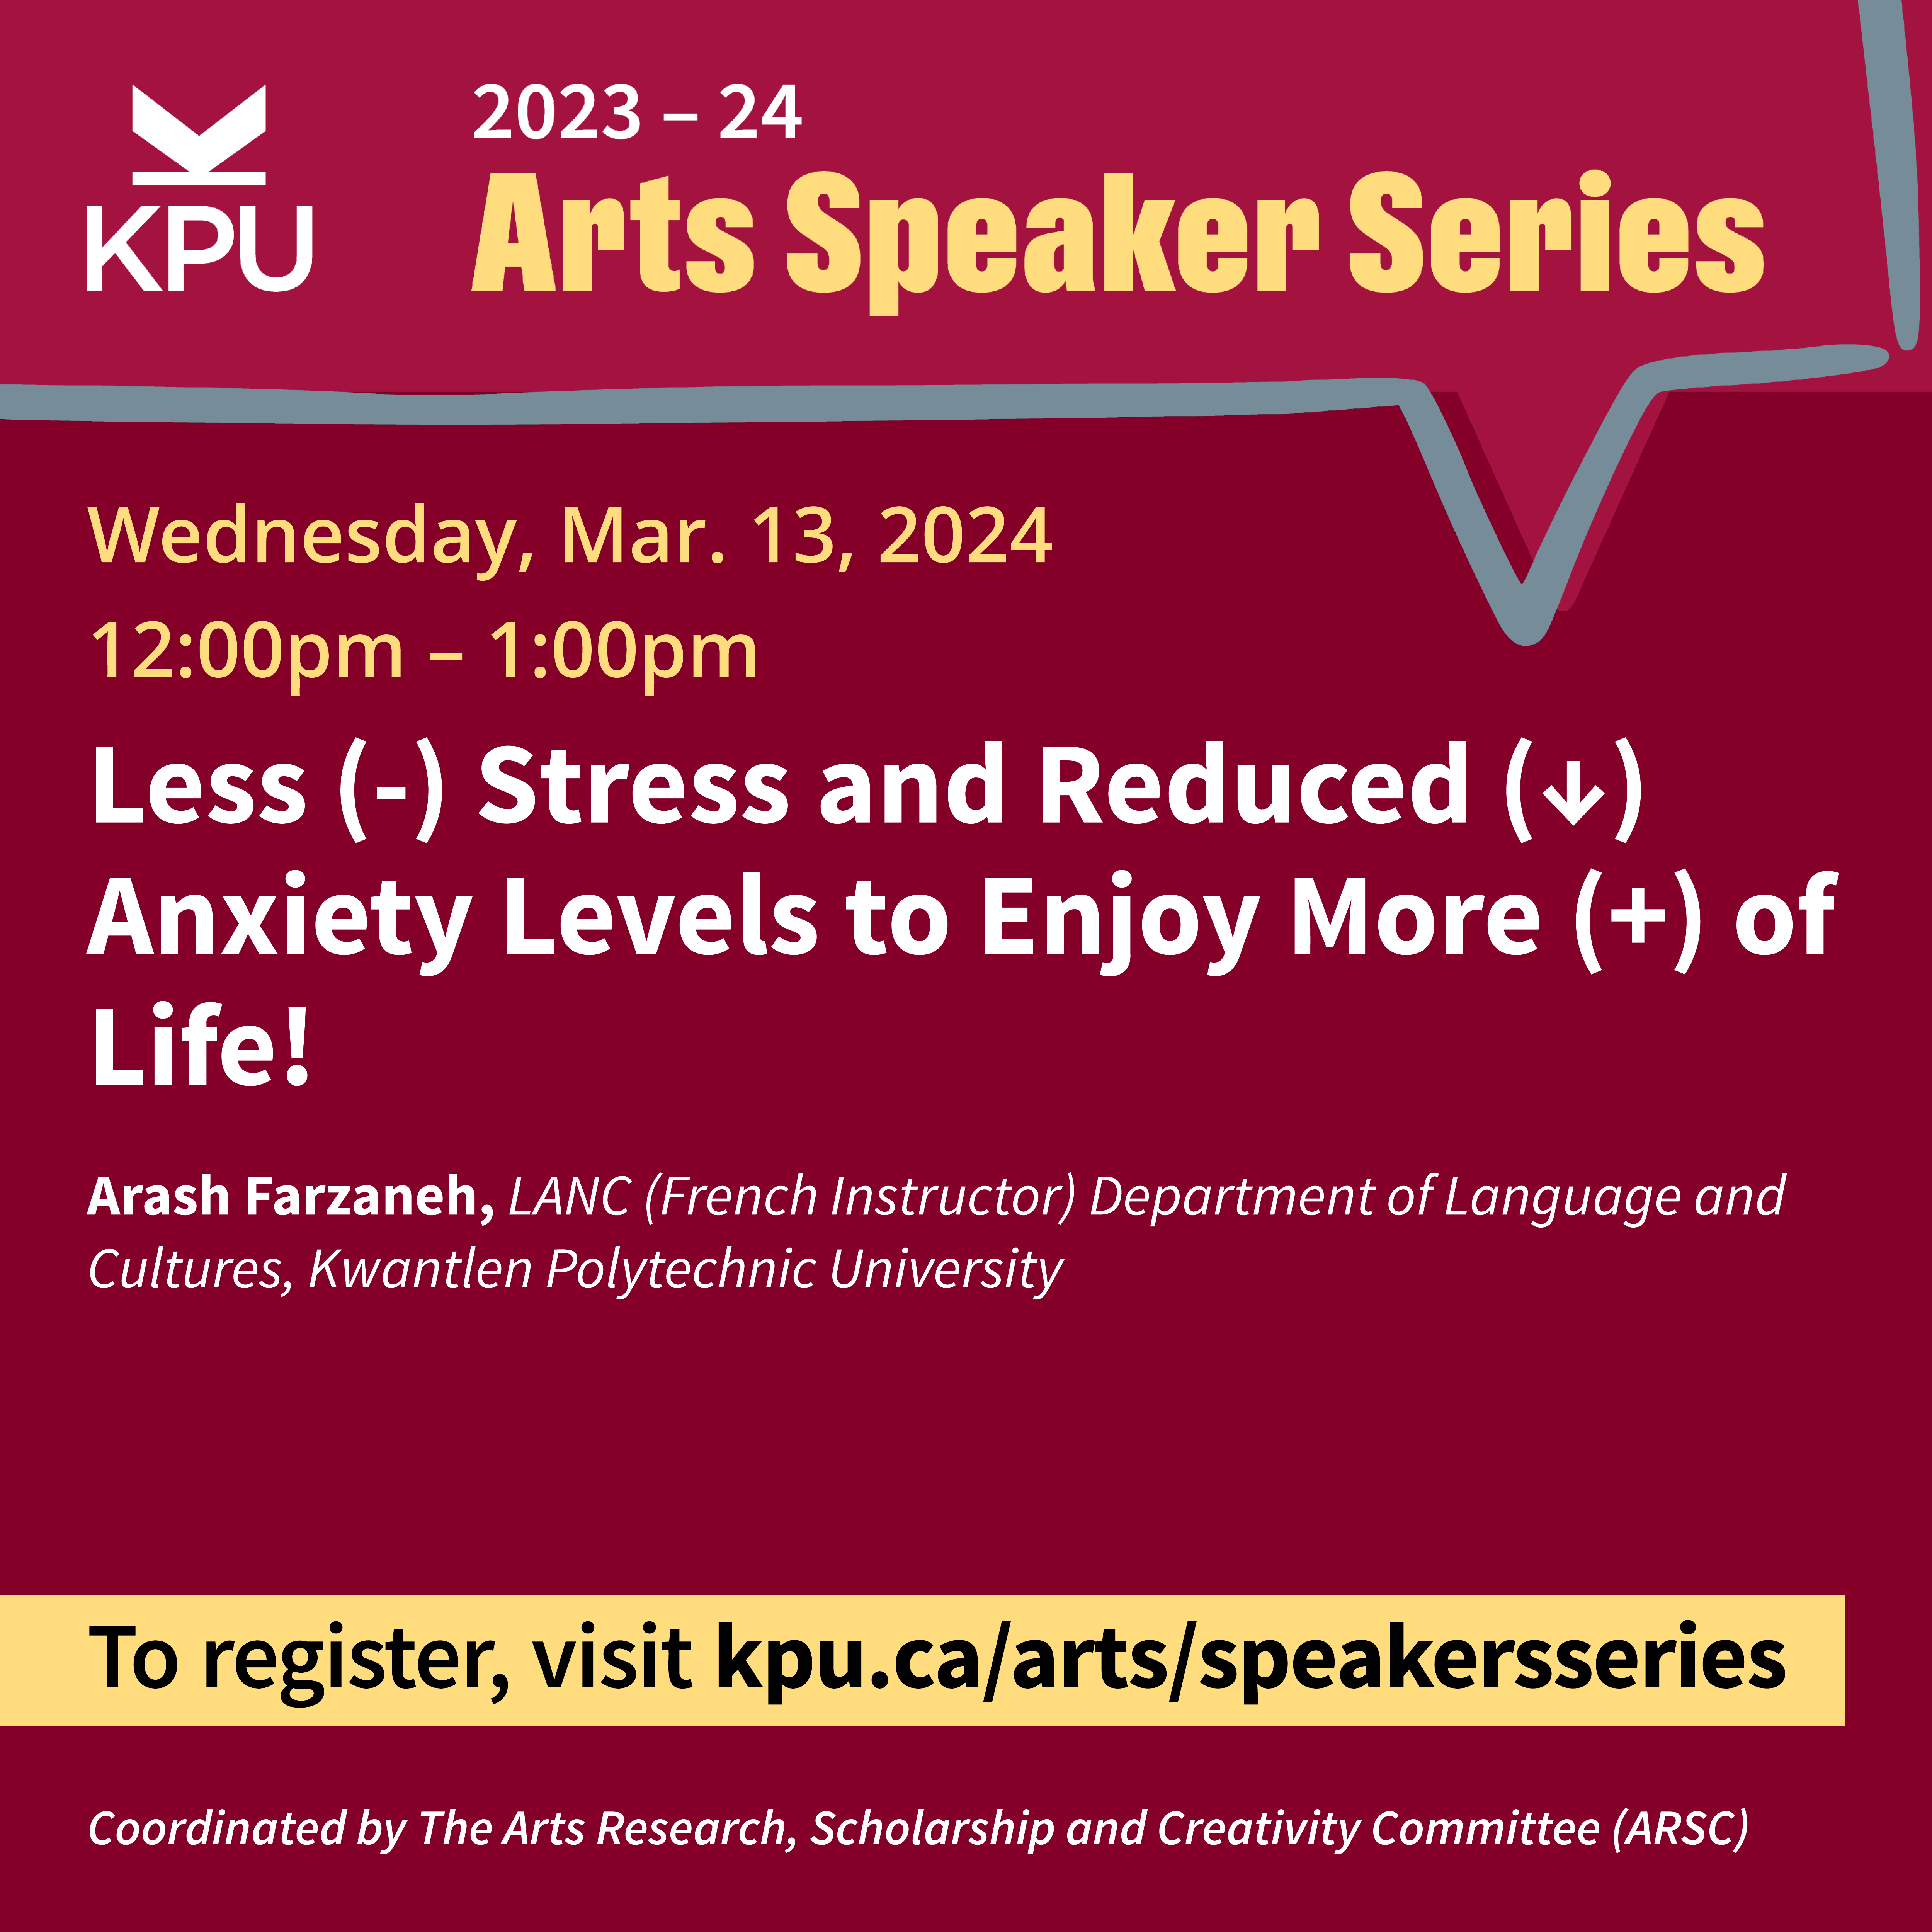 Arts Speaker Series 2023/24: "Less (-) Stress and Reduced (↓) Anxiety Levels to Enjoy More (+) of Life!" Wednesday, Mar. 14th, 12:00pm–1:00pm. 